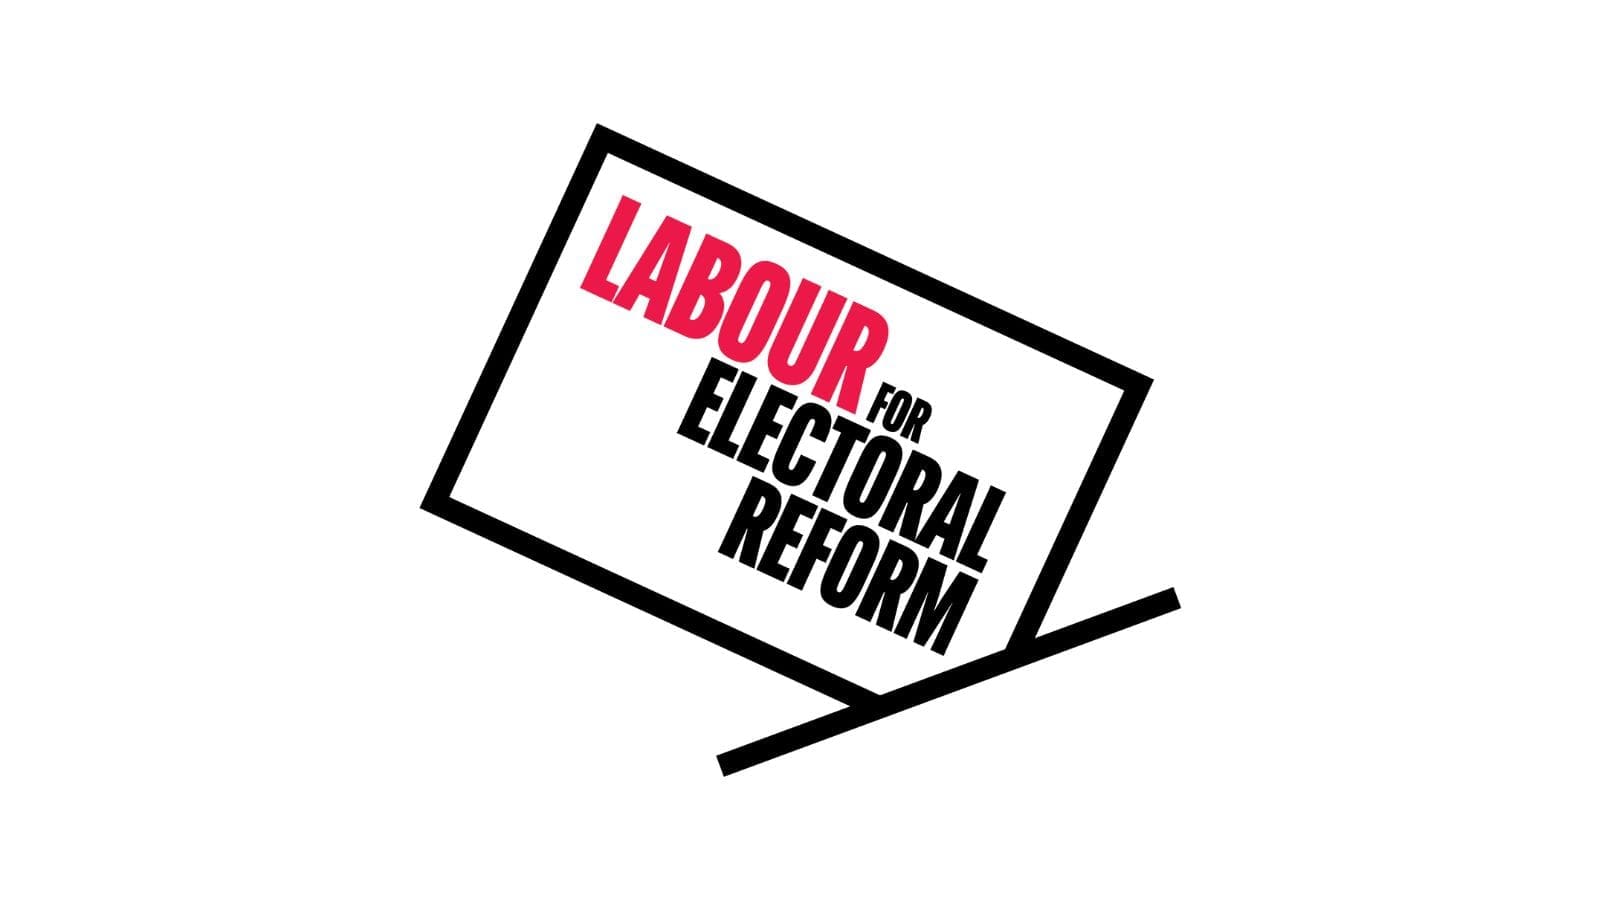 The word "LABOUR" in red writing with the words "FOR ELECTORAL REFORM" in black writing next to it. This is all contained in a black box with one corner missing. There is a line across this corner.